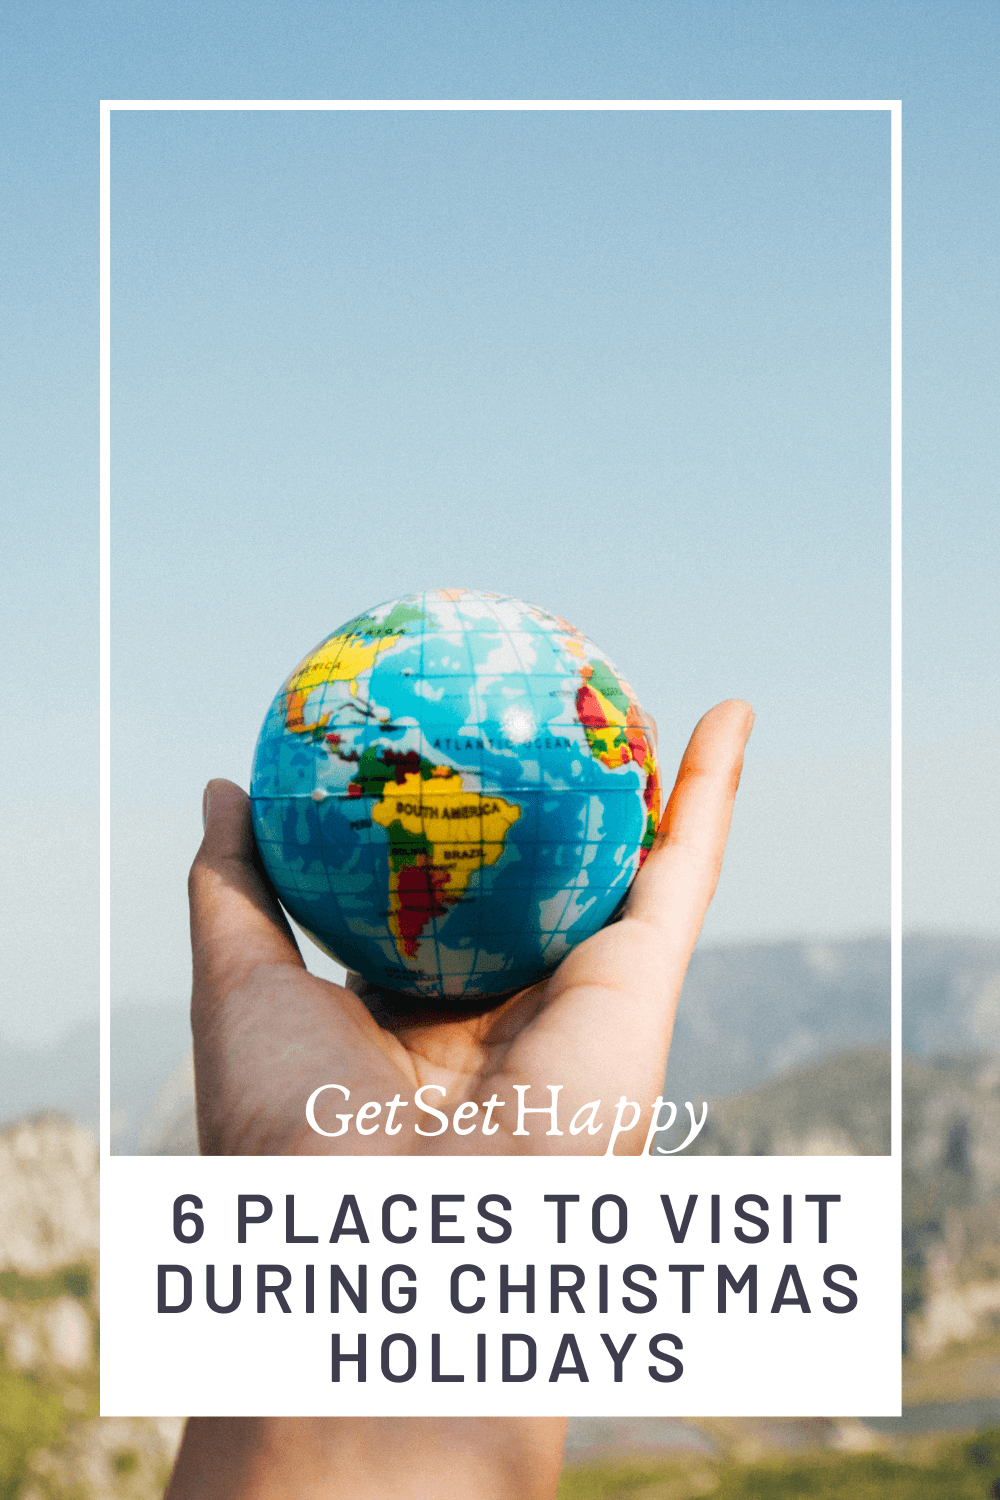 Top 6 places to visit during Christmas holidays